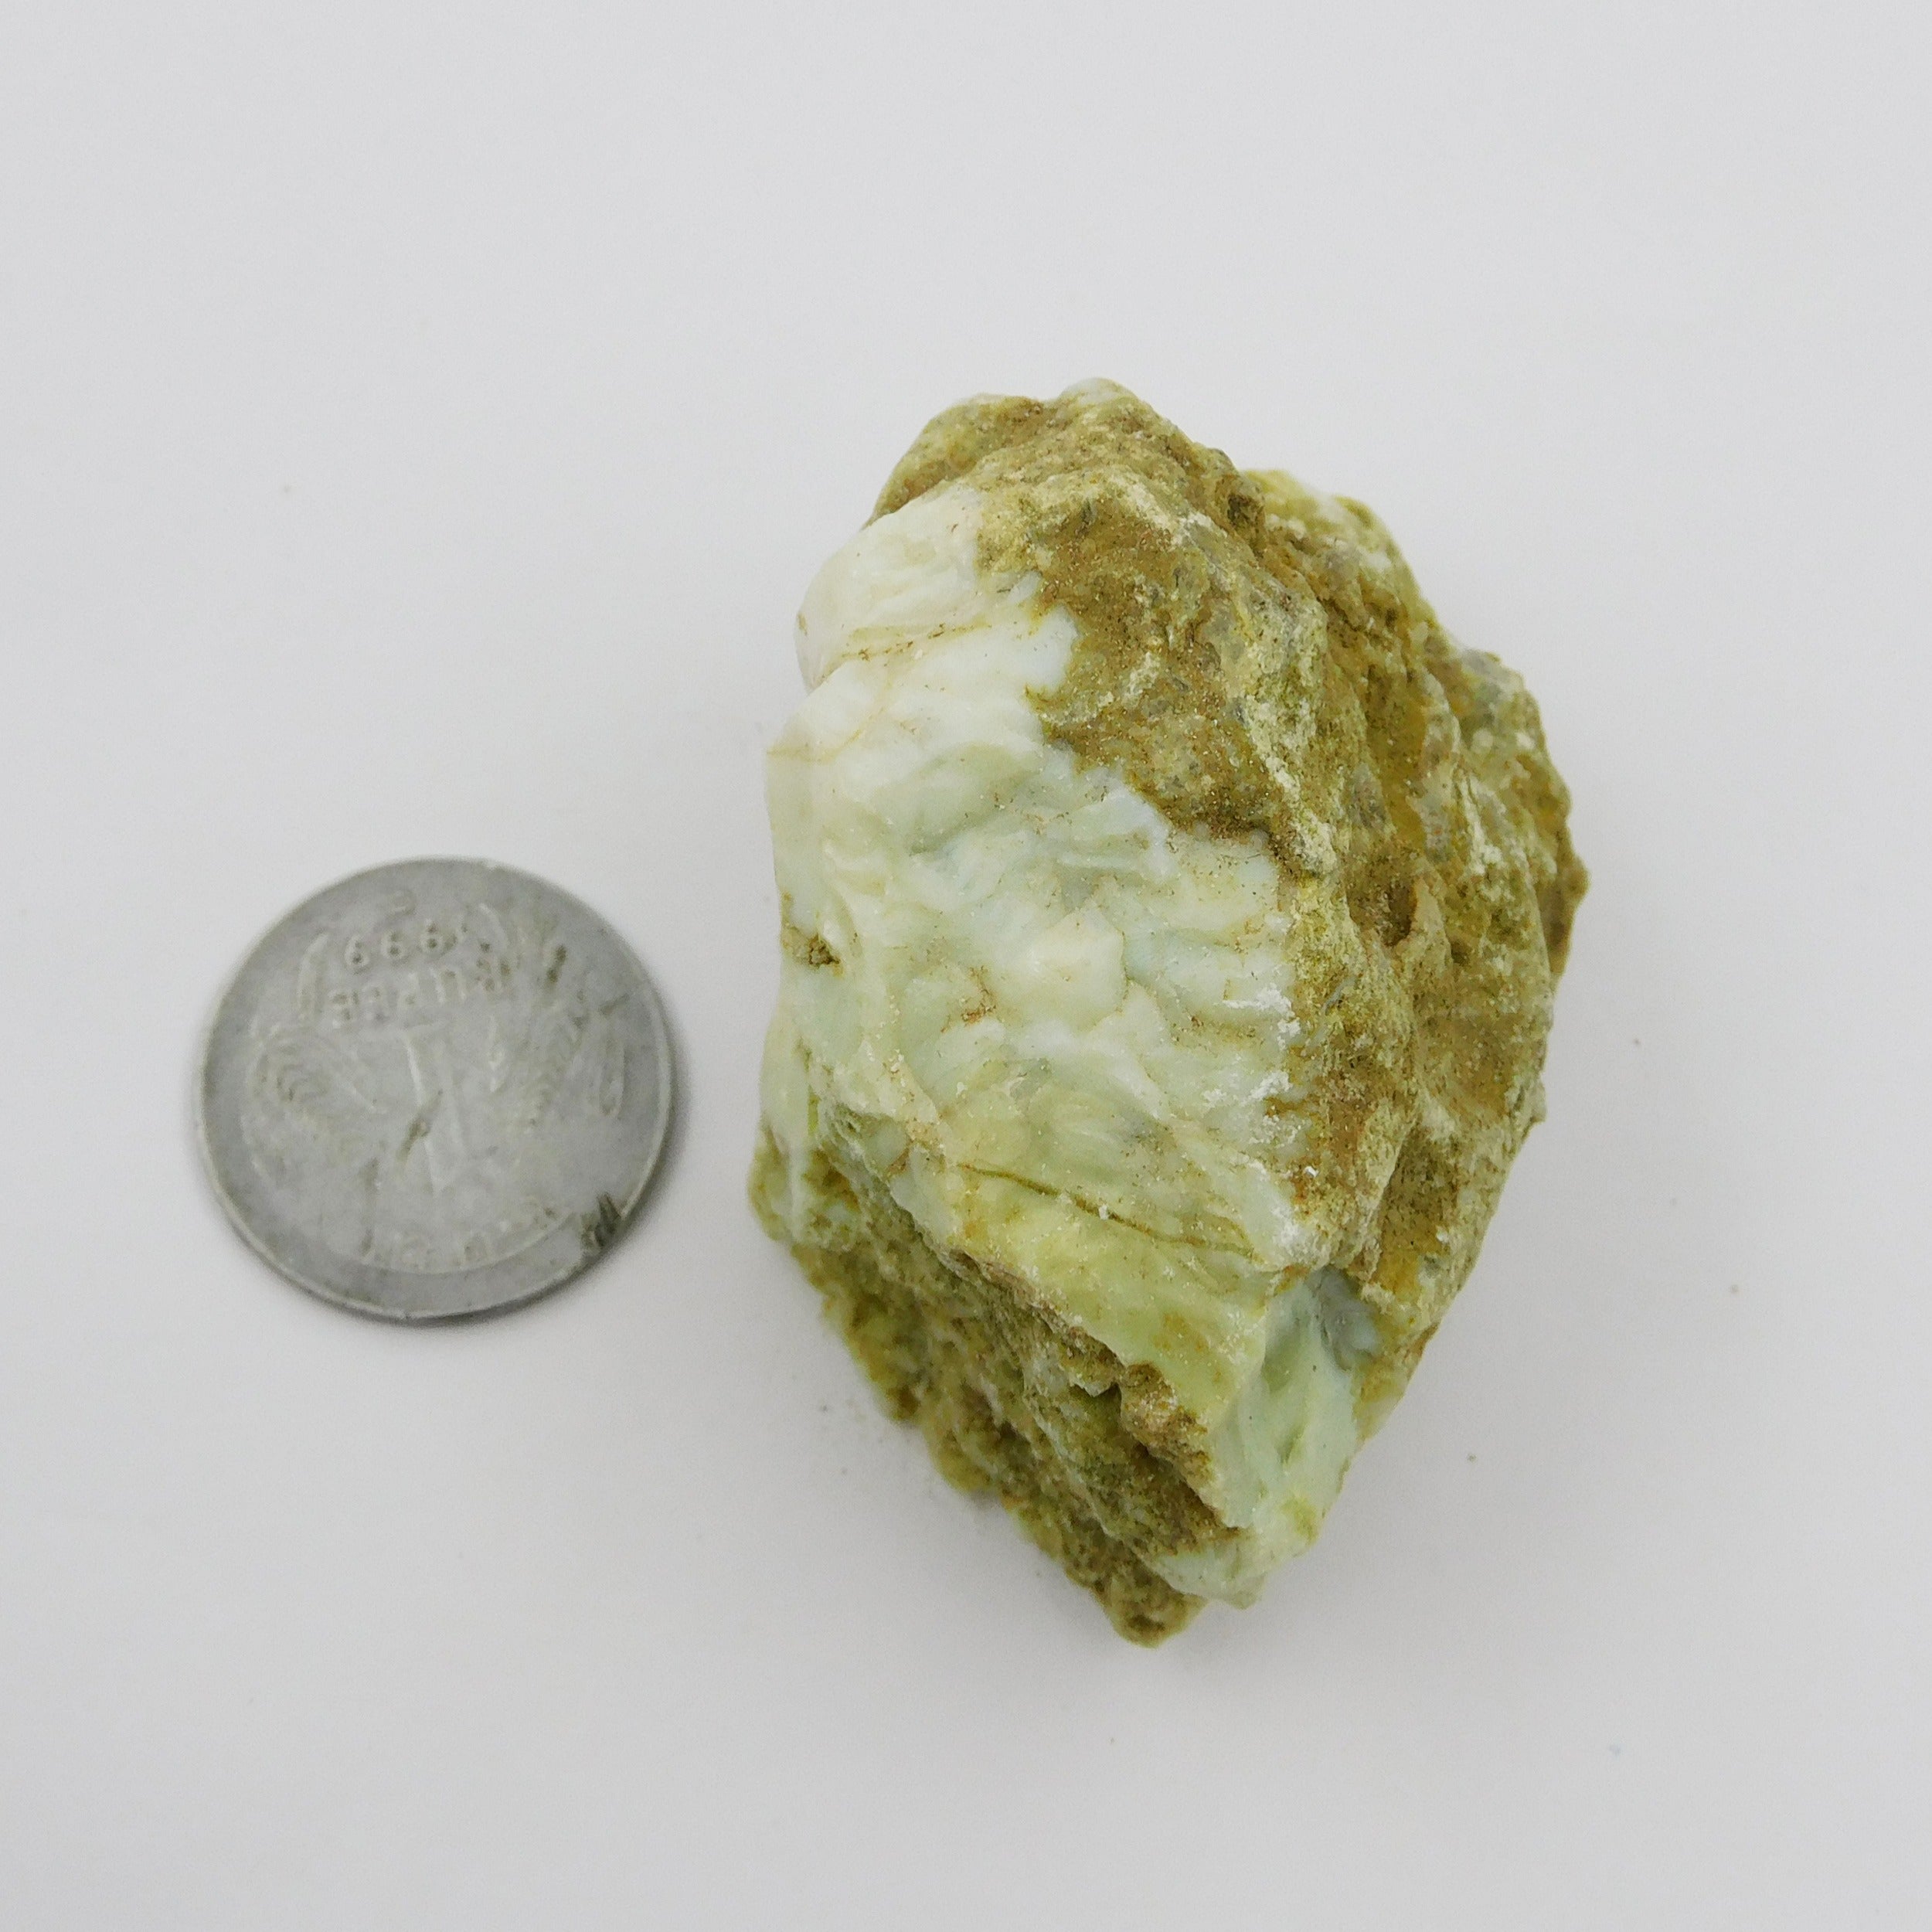 Earth Mind Natural Opal rough 499.90 Carat White Opal Raw Uncut Certified Raw Opal Uncut Rough Use In Making Jewelry Loose Gemstone